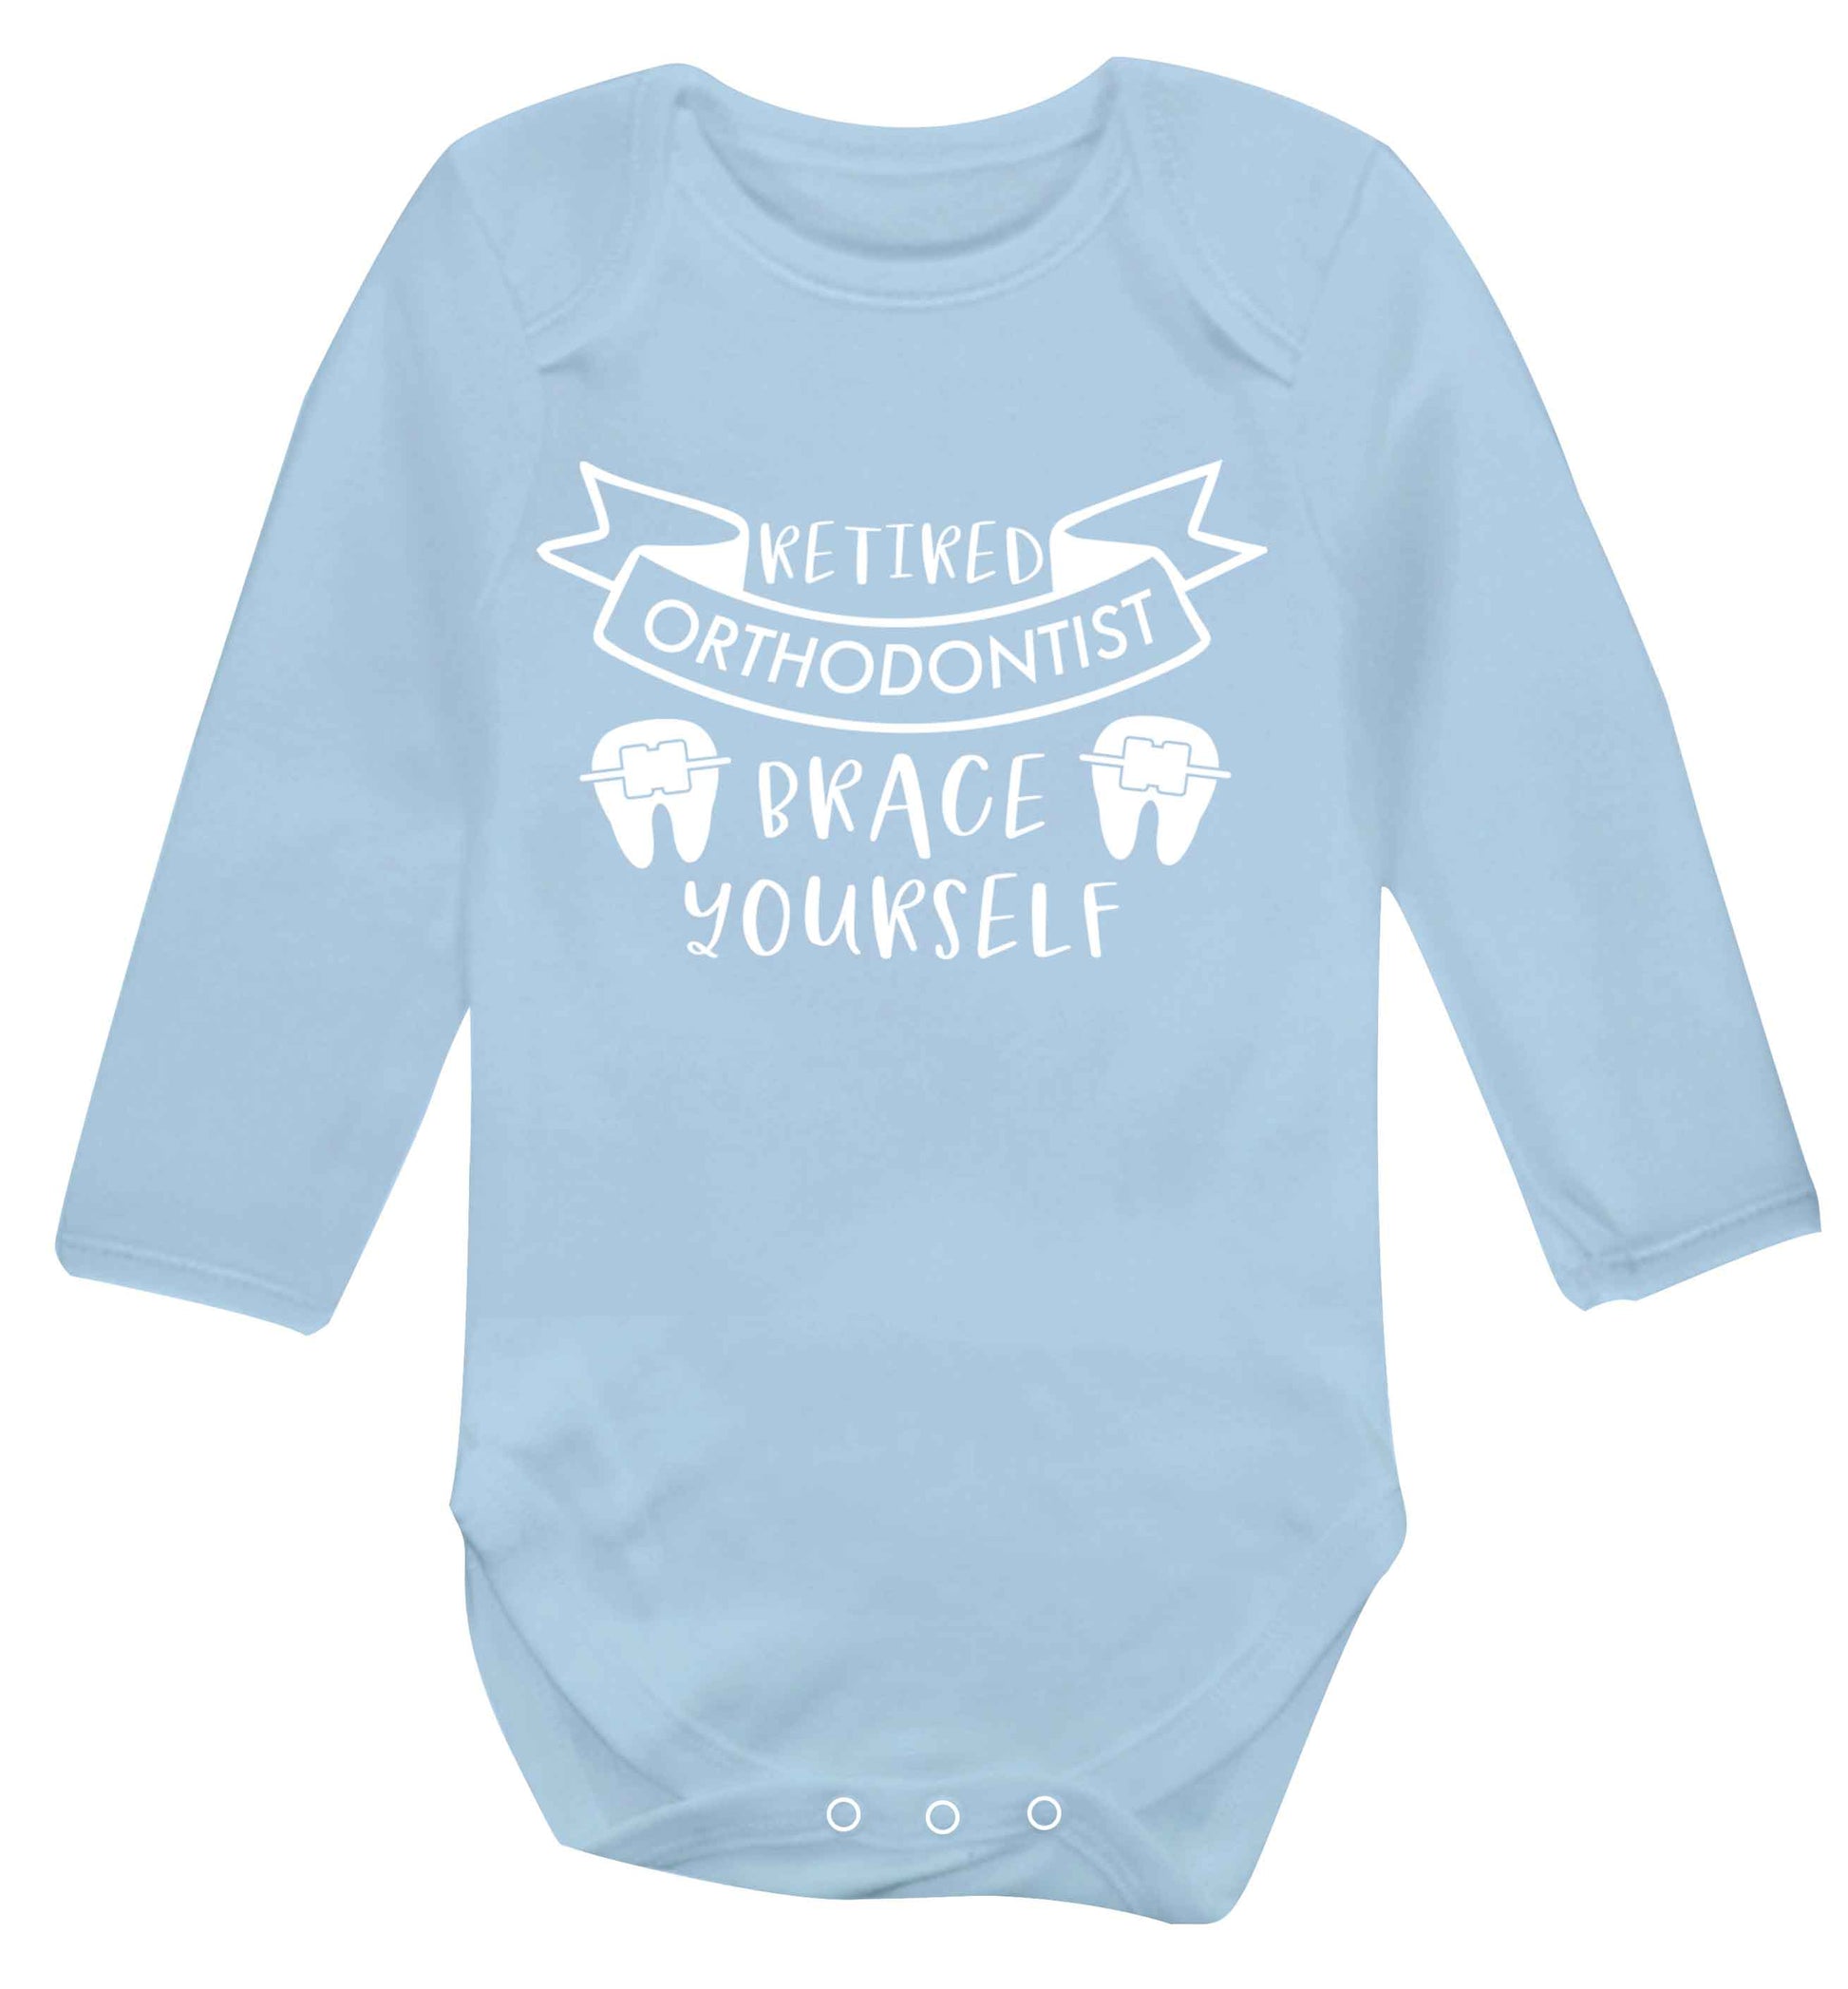 Retired orthodontist brace yourself Baby Vest long sleeved pale blue 6-12 months